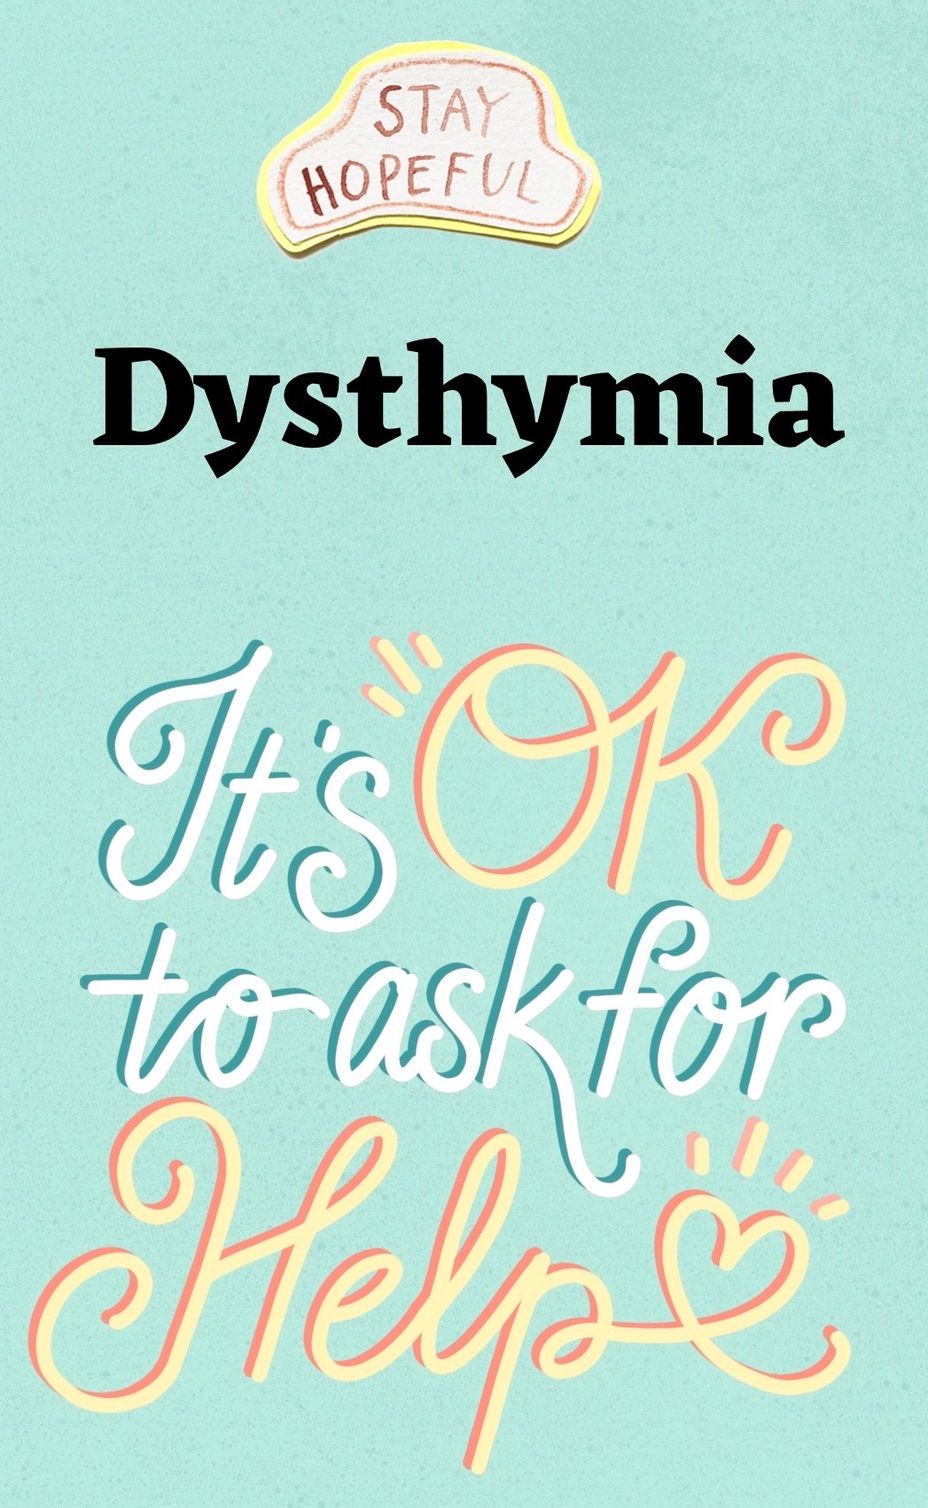 <p><a href="https://themighty.com/topic/persistent-depressive-disorder/?label=Dysthymia" class="tm-embed-link  tm-autolink health-map" data-id="5b23cea900553f33fe99a040" data-name="Dysthymia" title="Dysthymia" target="_blank">Dysthymia</a></p>